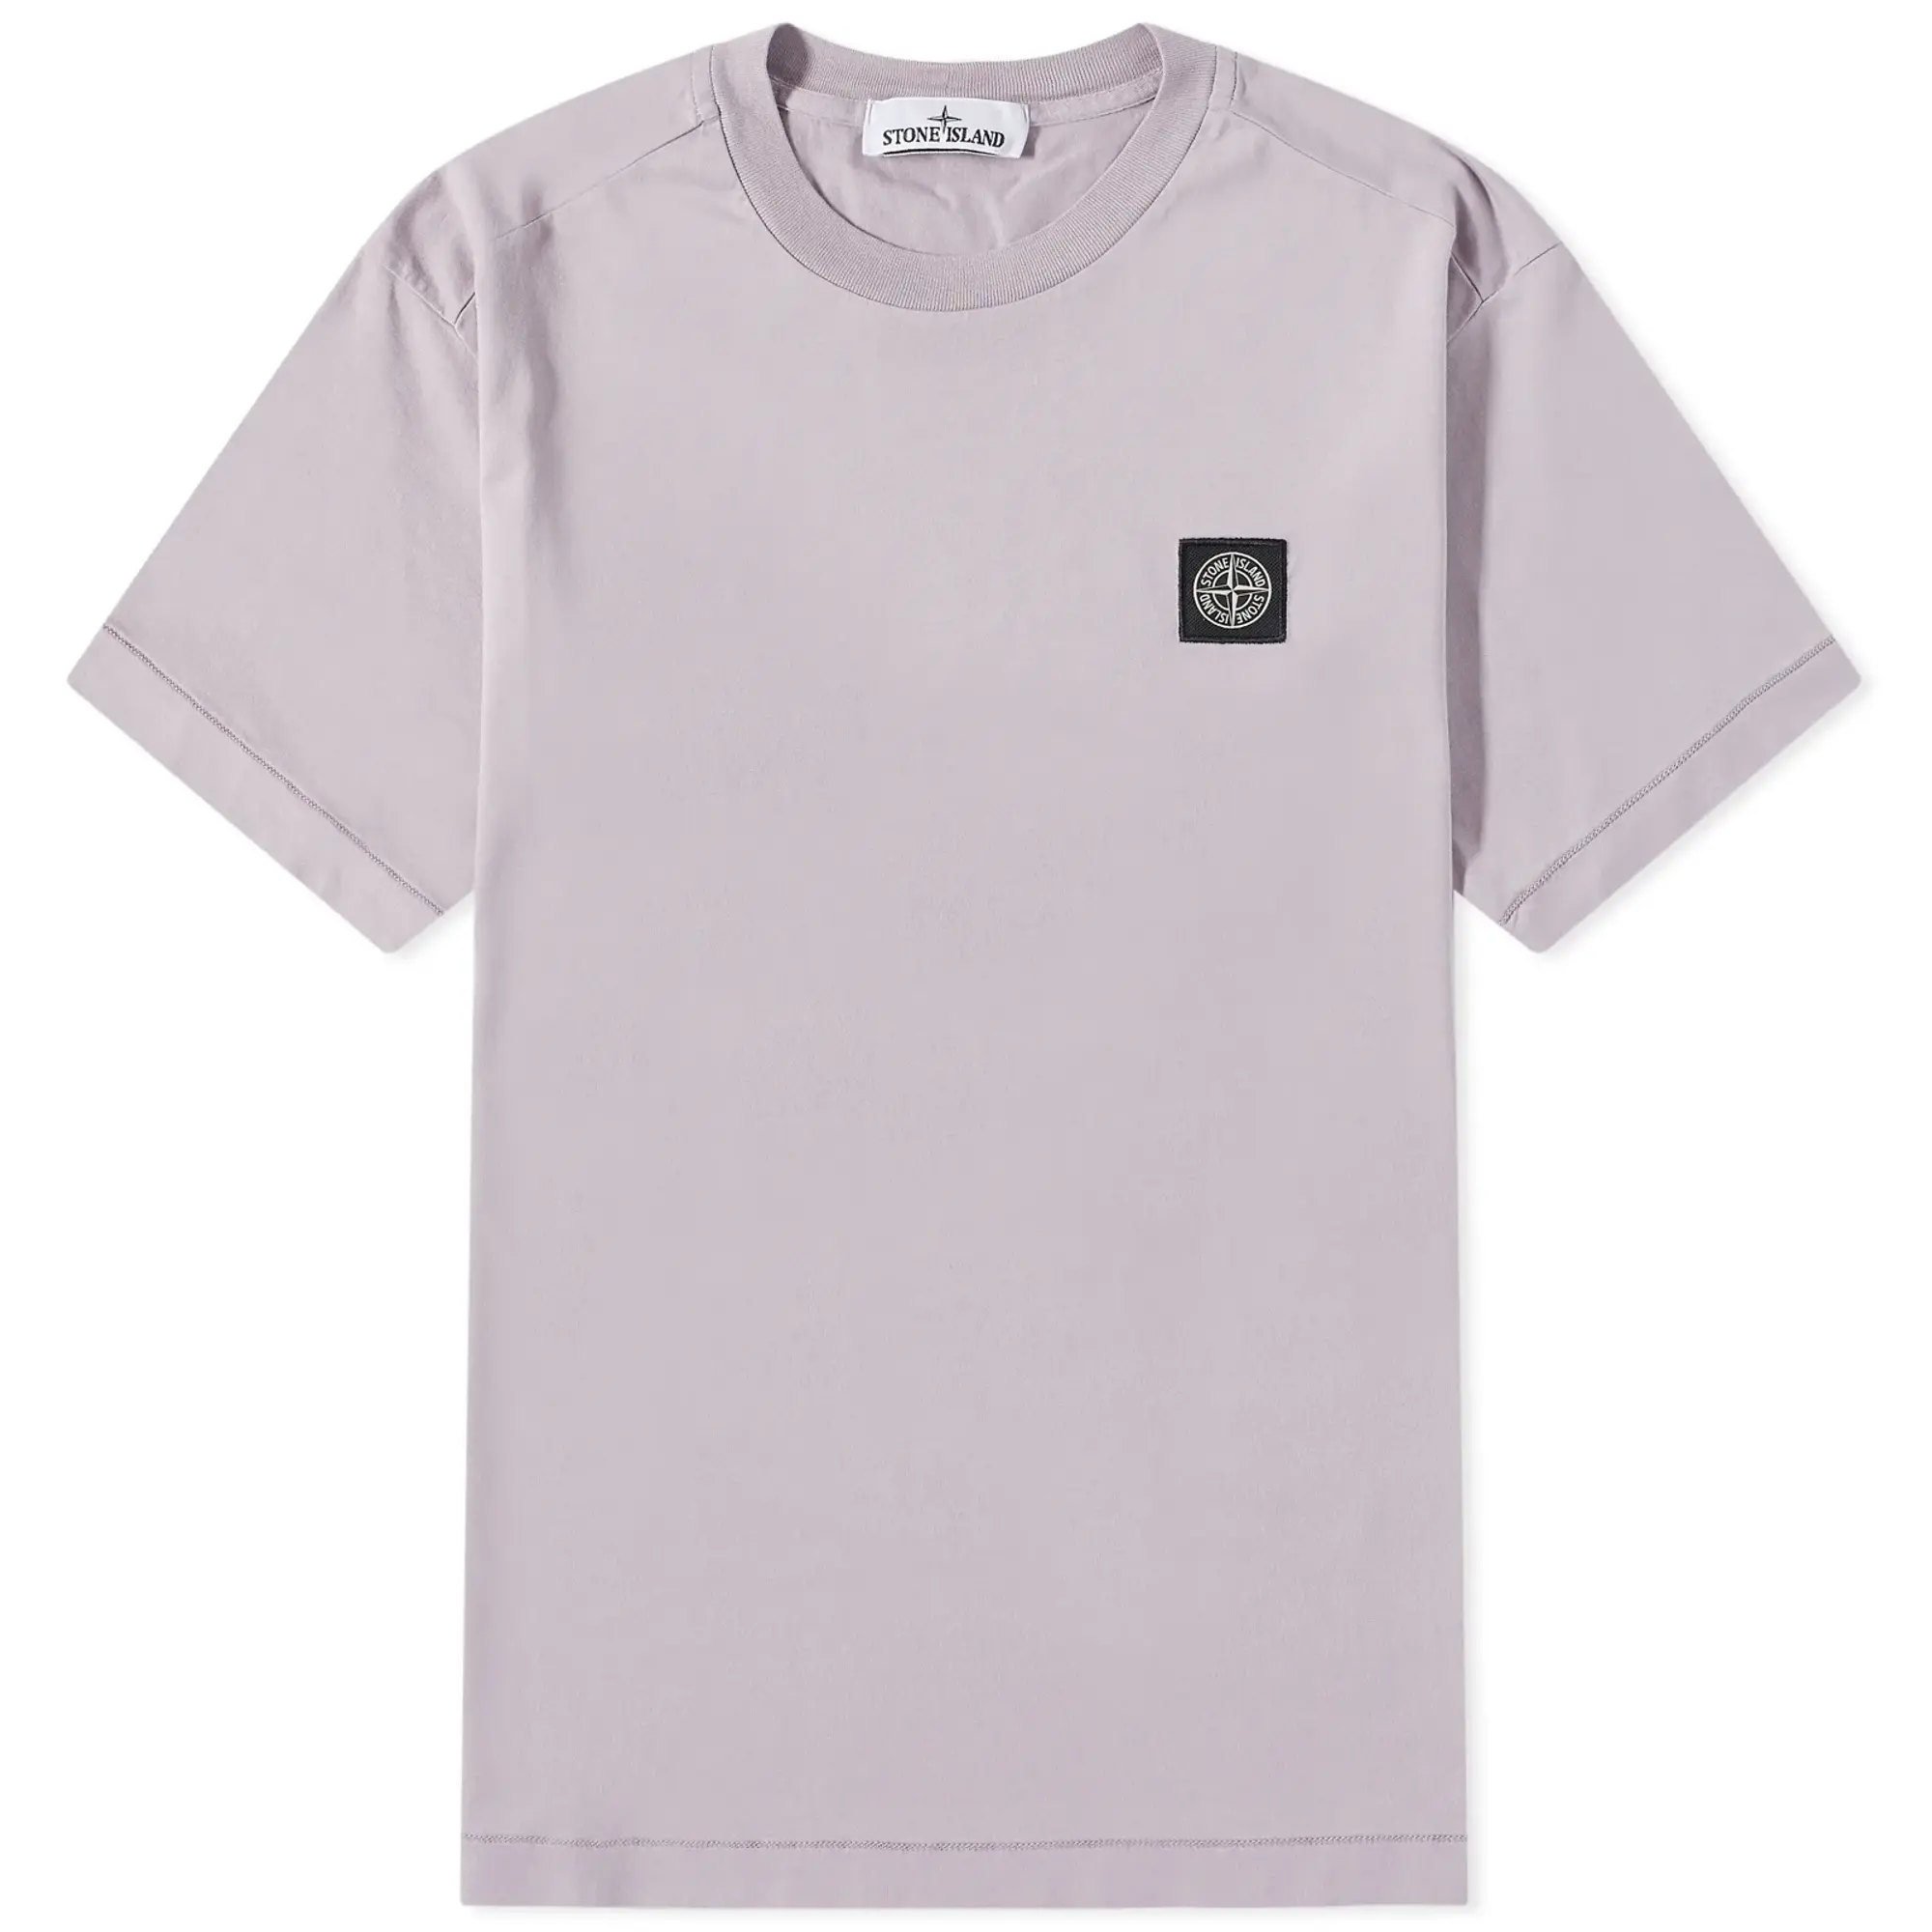 Stone Island Compass Patch T-Shirt - Lavender